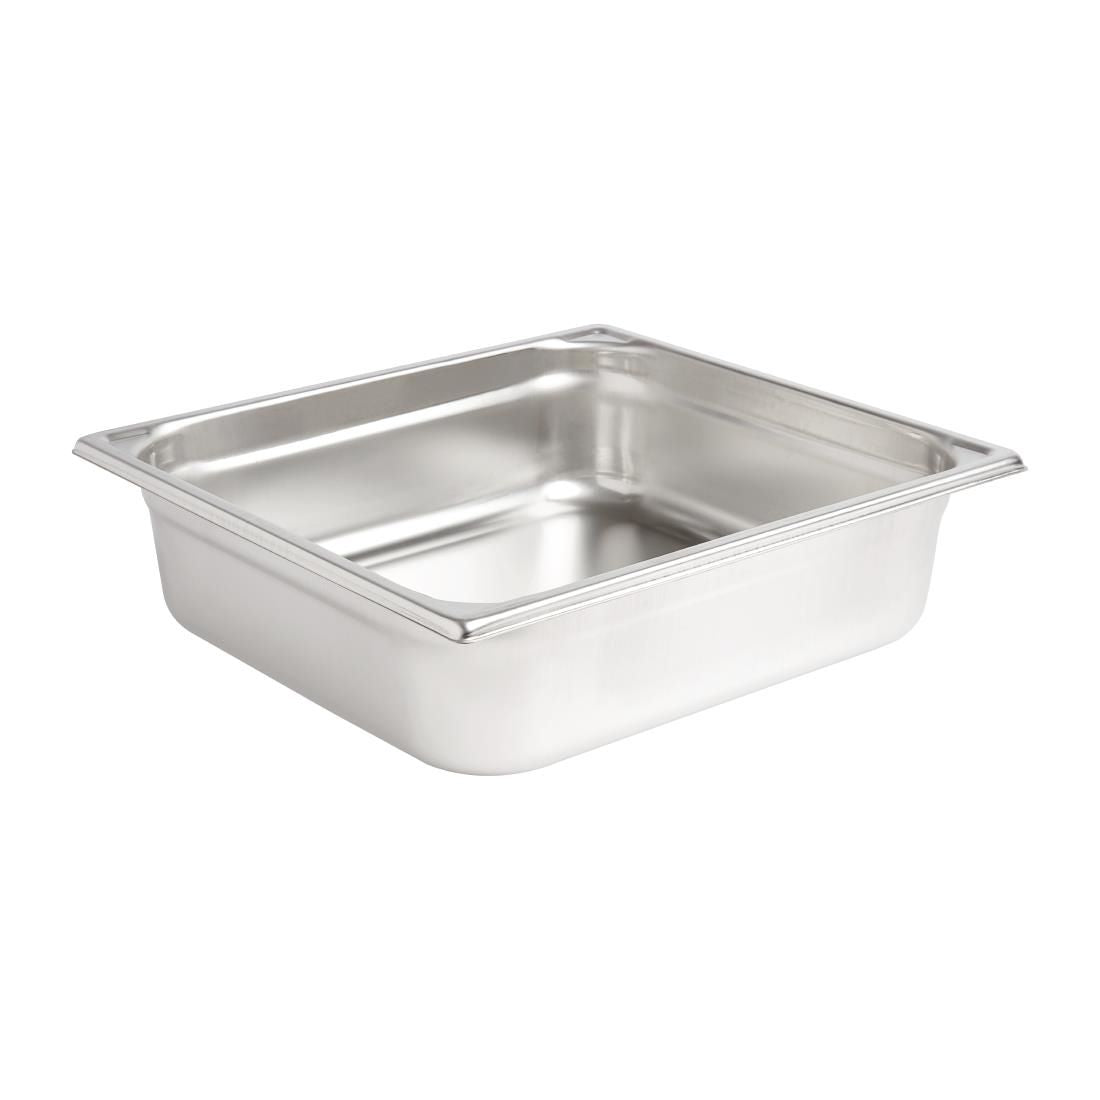 Bourgeat Stainless Steel 2/3 Gastronorm Pan 100mm JD Catering Equipment Solutions Ltd